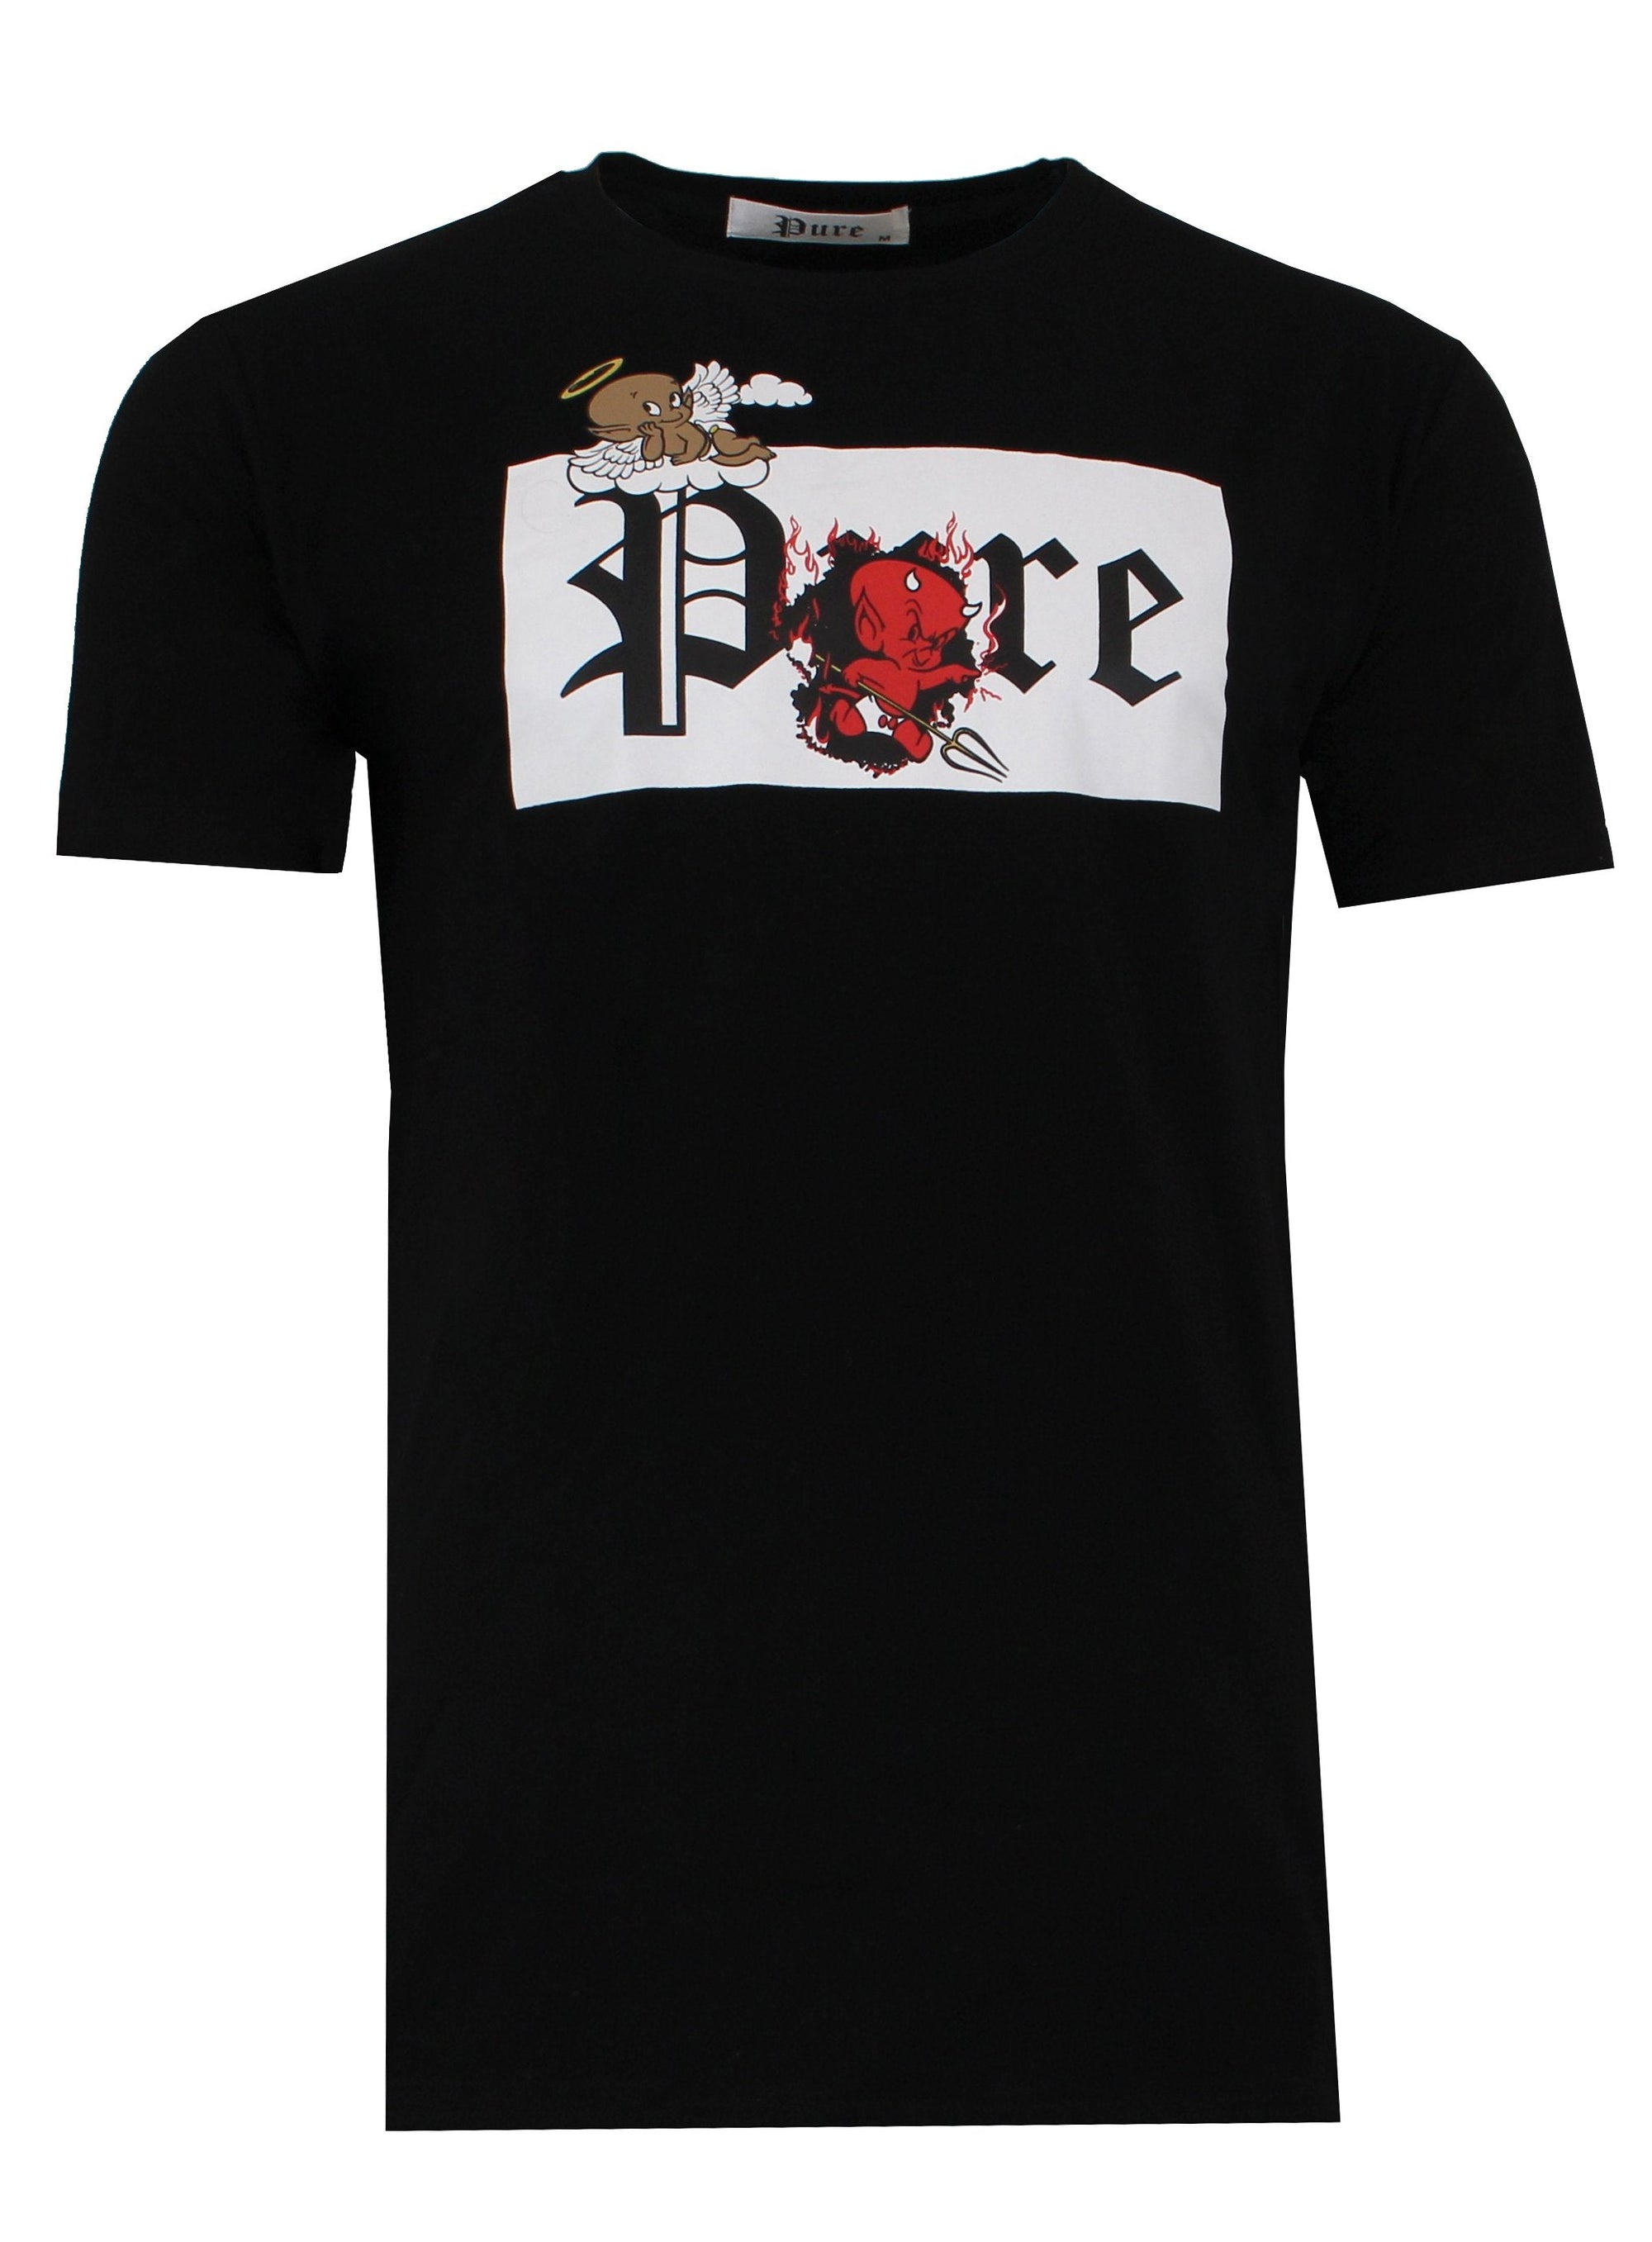 New 2021 Pure Tee with White Block Devil and Angel